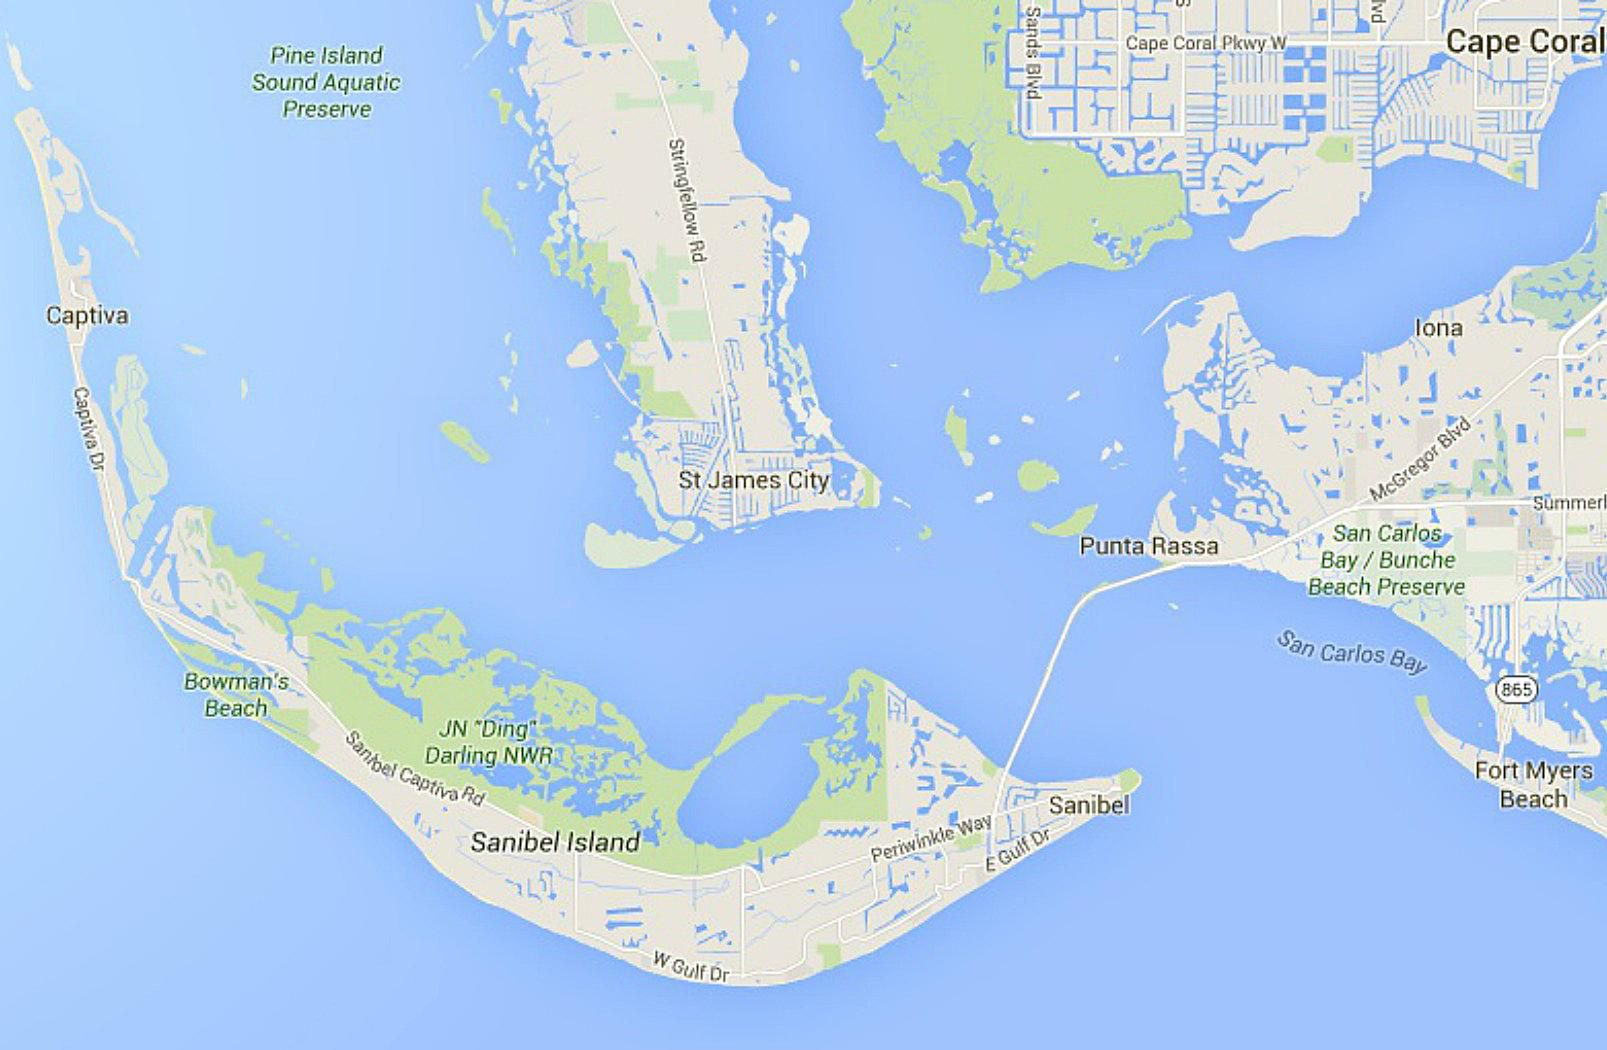 Maps Of Florida: Orlando, Tampa, Miami, Keys, And More - Map Of Islands Off The Coast Of Florida